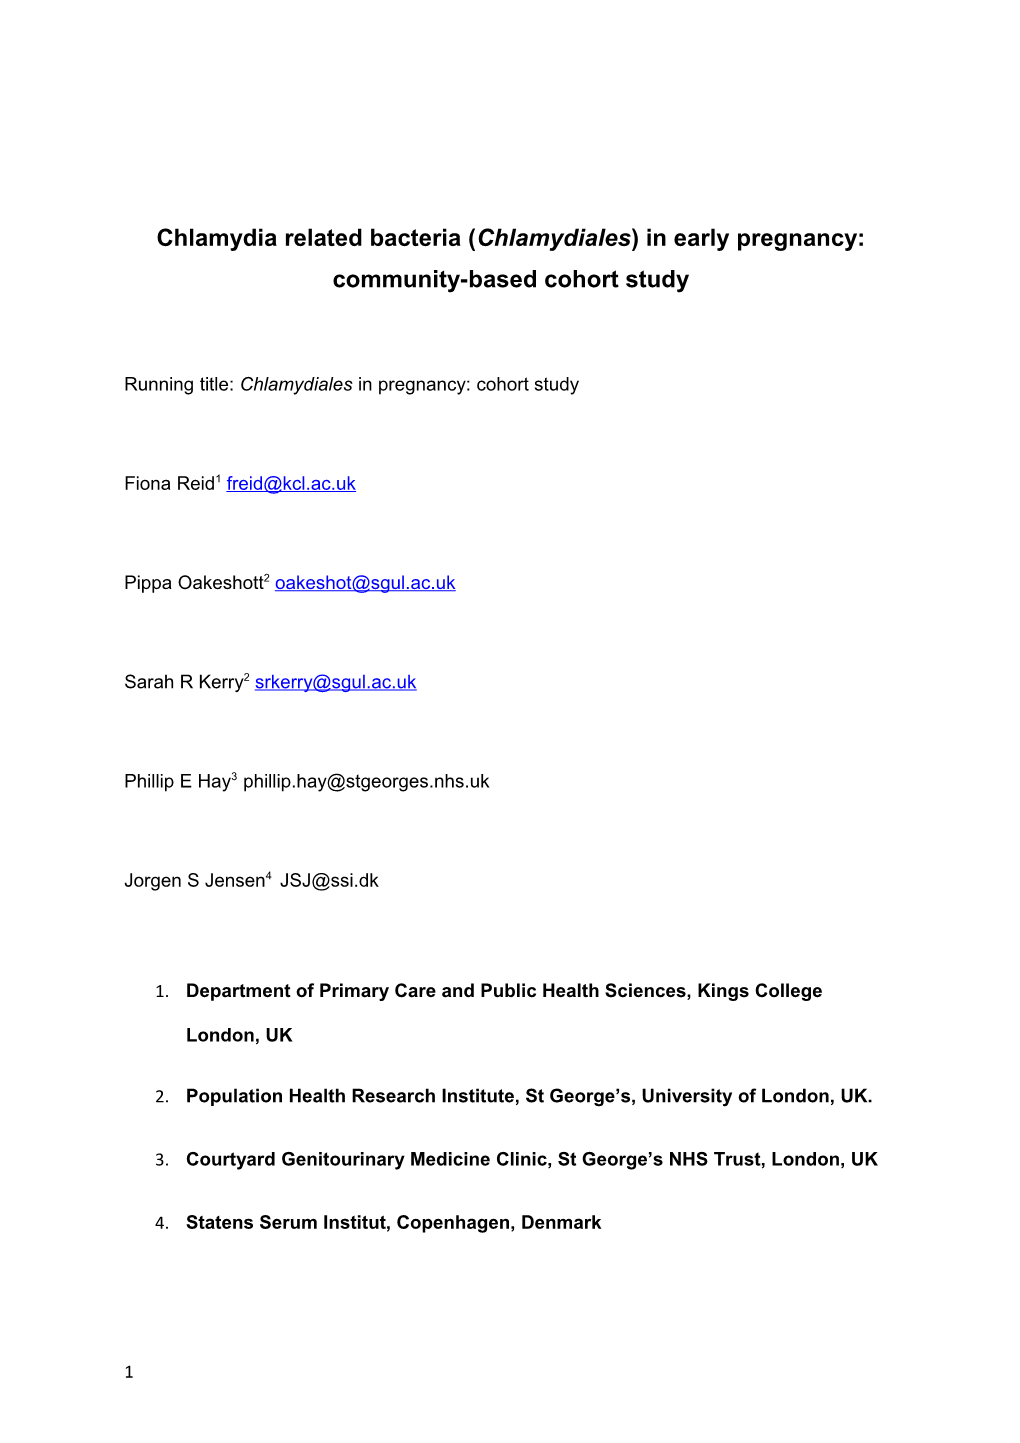 Chlamydia Related Bacteria (Chlamydiales) in Early Pregnancy: Community-Based Cohort Study